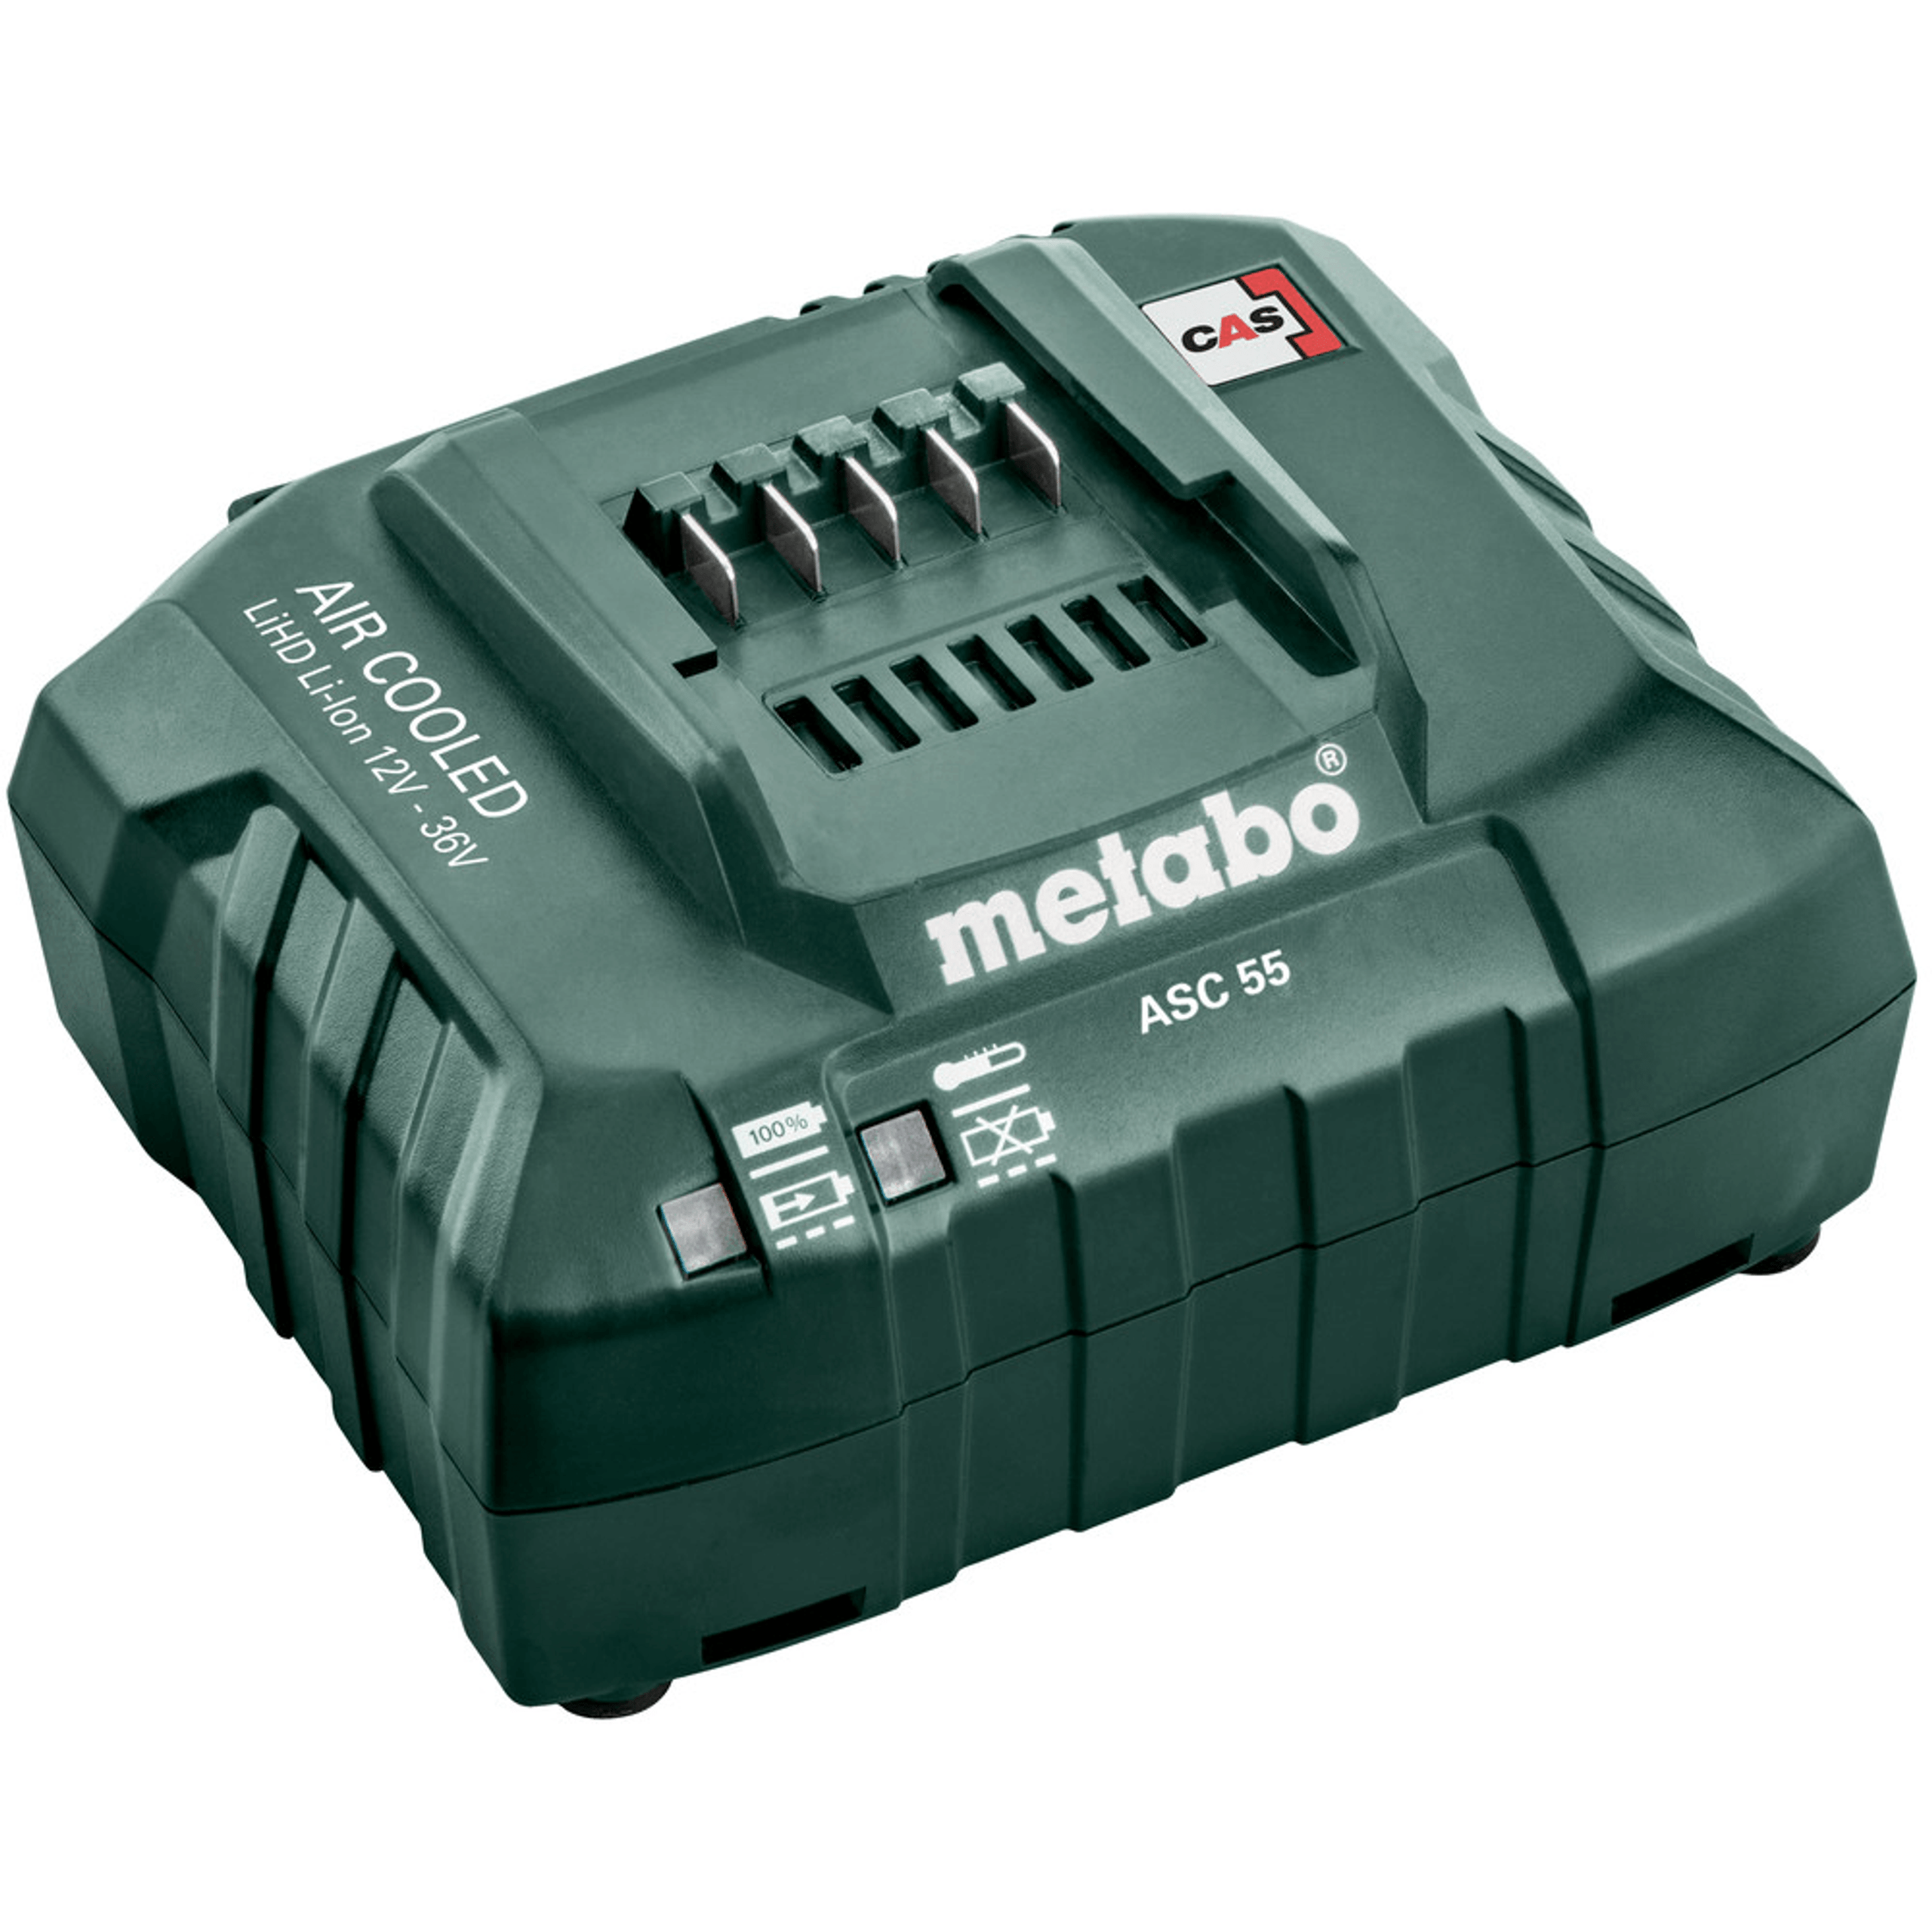 18V 5.5Ah Brushless Rotary Hammer Drill and Dust ExtractionAU60171400 by Metabo